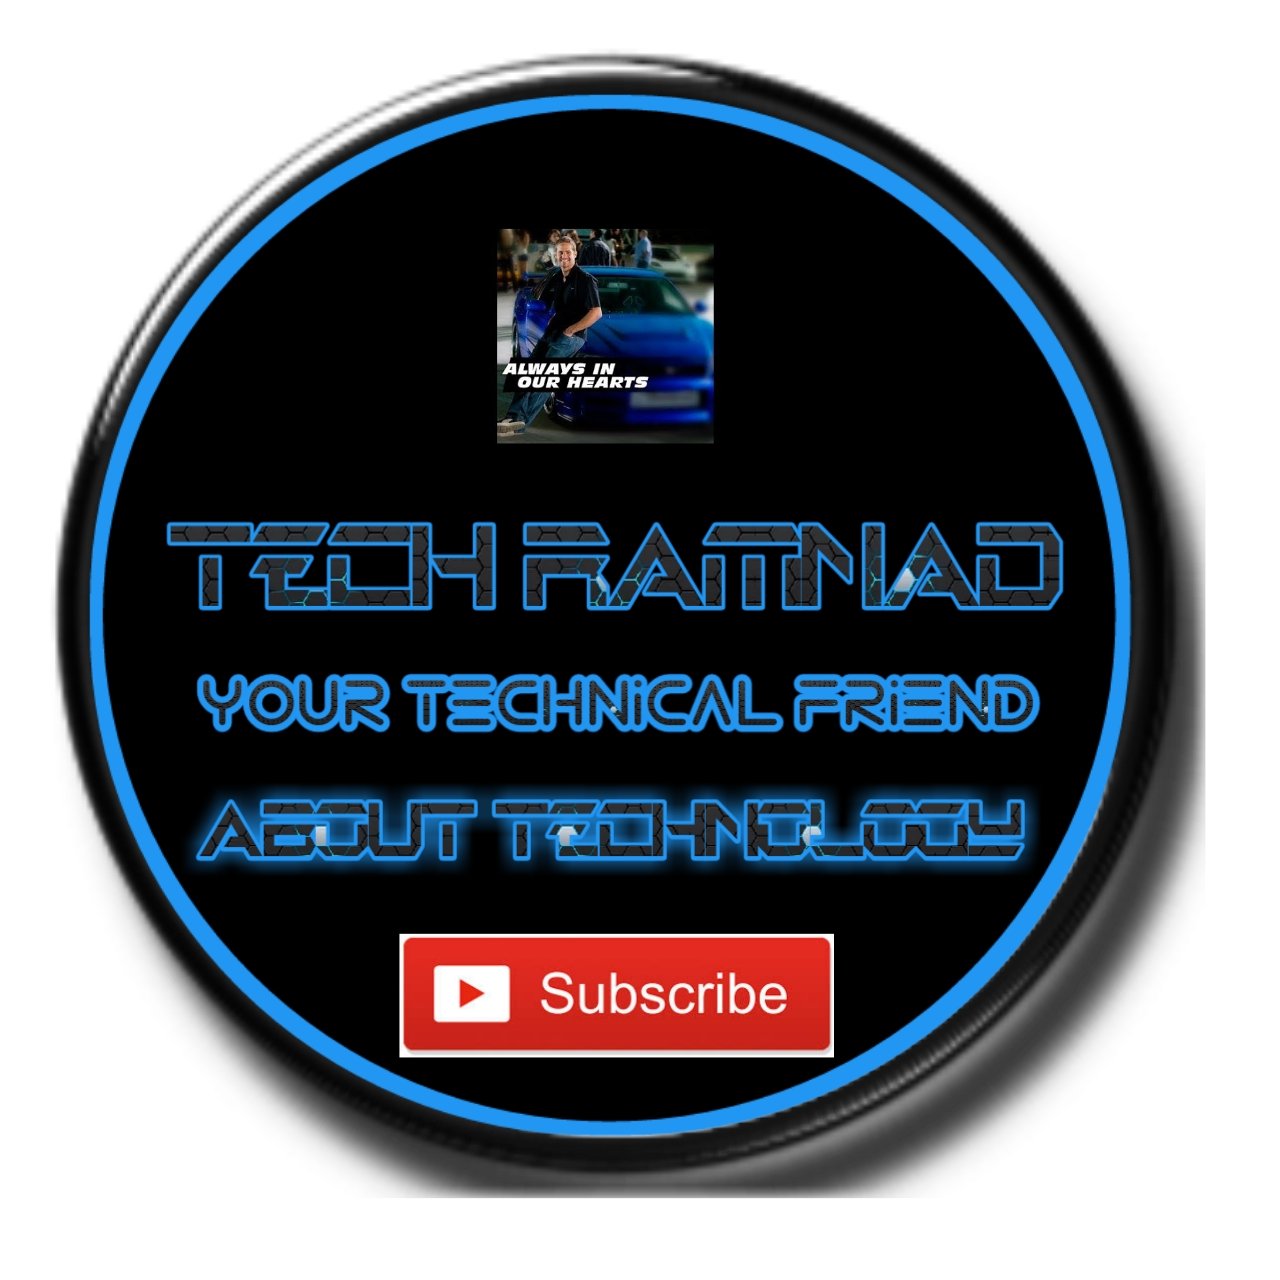 im an youtuber who used to post best tech videos for my subscribers family